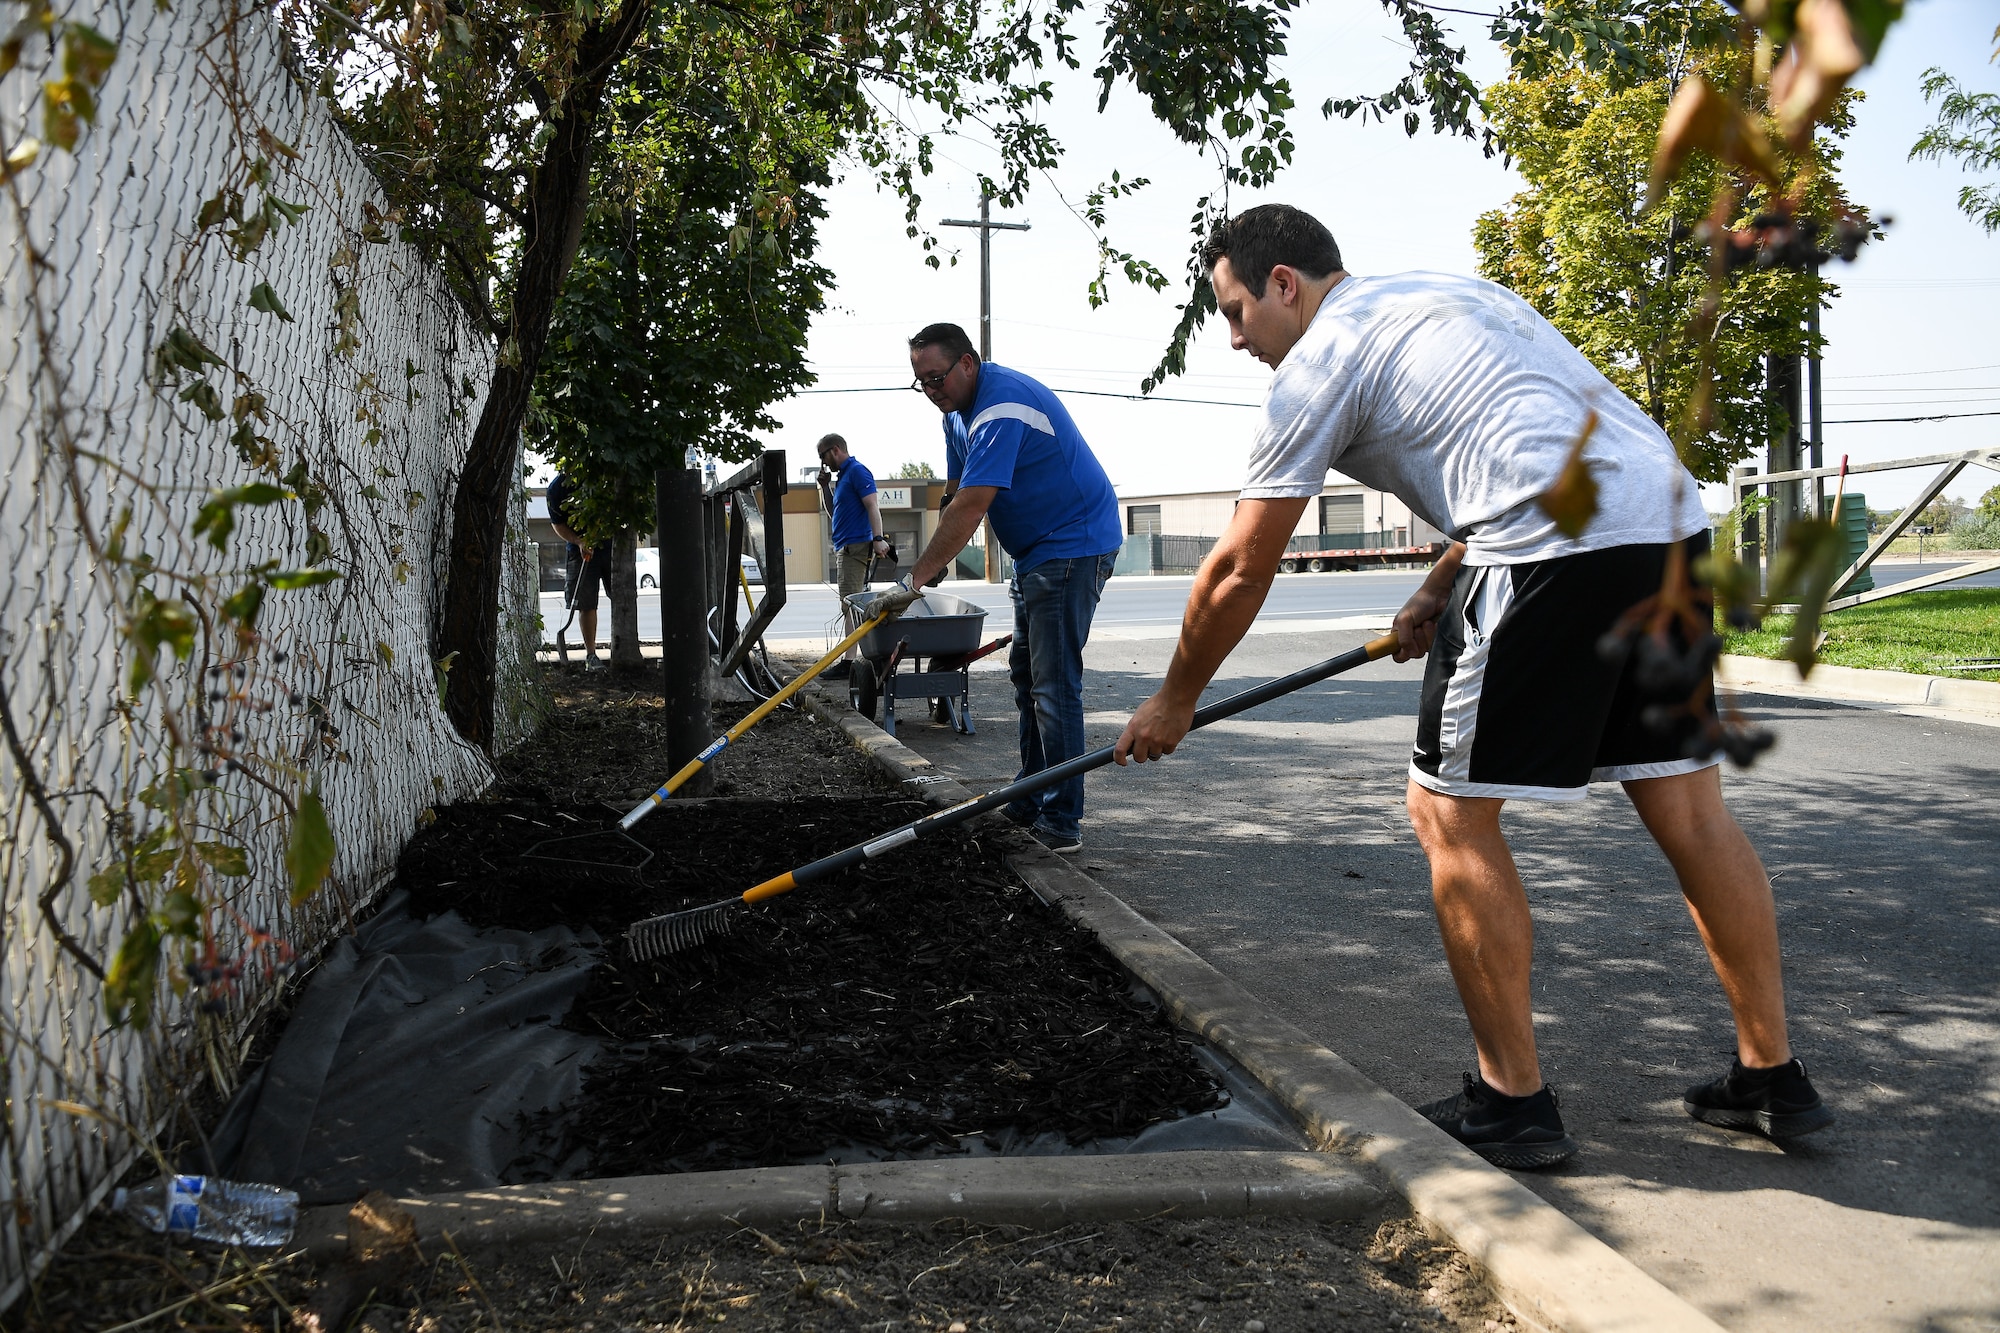 Jeff Gorton and Brandon Bailey (front, left to right), volunteers from the Air Force Nuclear Weapons Center’s Ground Based Strategic Deterrent Systems directorate at Hill AFB, Utah, put down new bark in a parking strip at the Safe Harbor Crisis Center in Kaysville, Utah, on Sept. 17, 2020. The crisis center provides shelter and support services to survivors of domestic abuse and sexual assault. (Air Force photo by R. Nial Bradshaw)